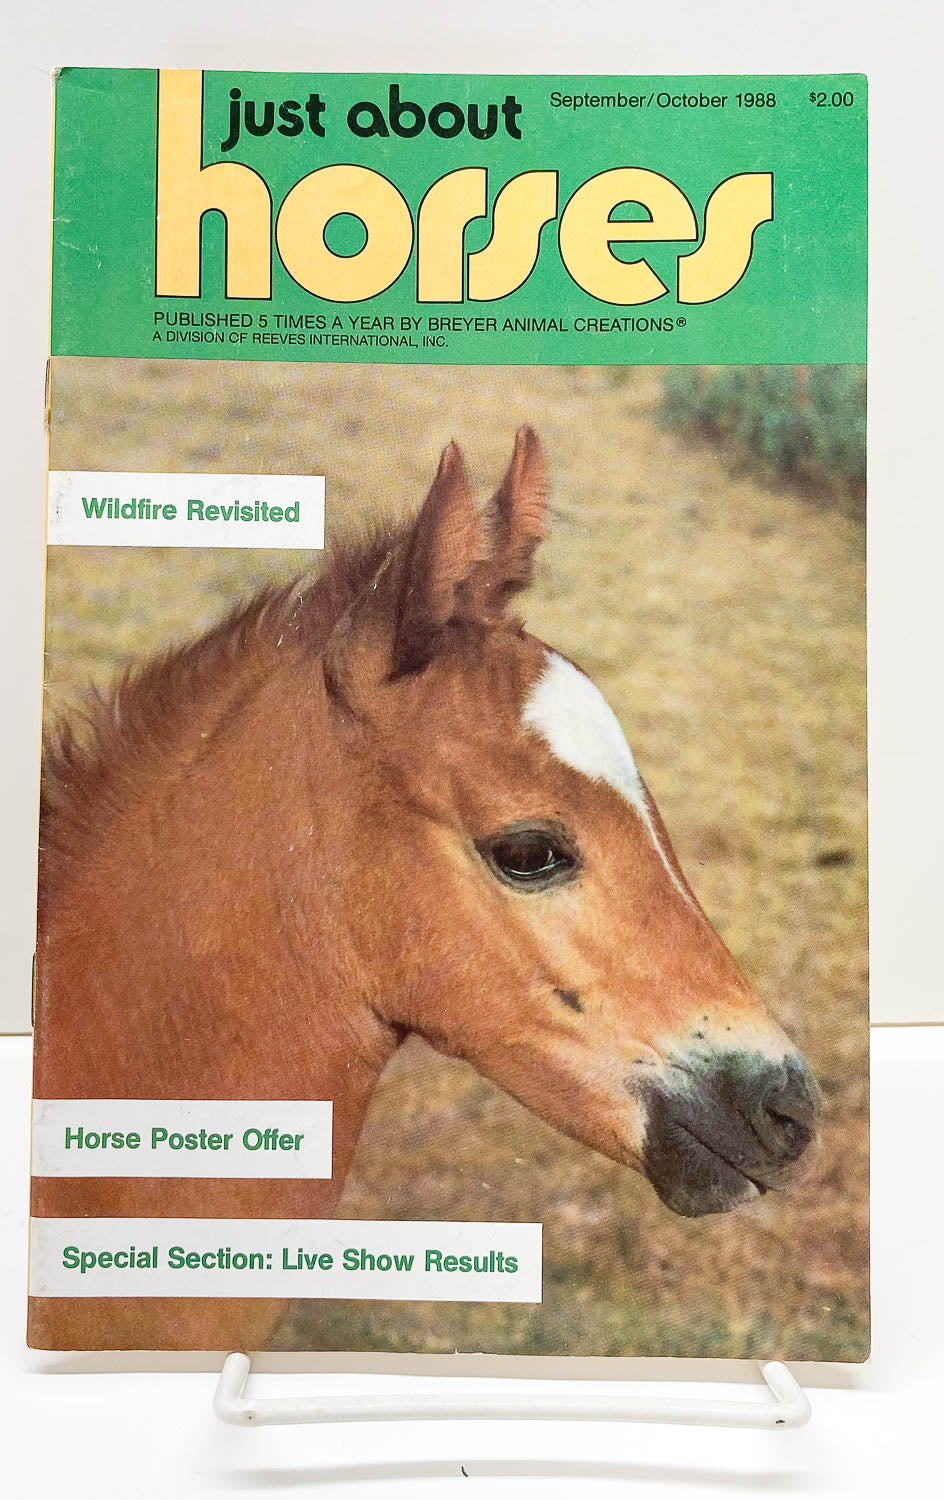 Just About Horses Magazine Vol. 15 No. 4, 1988, Sept/Oct